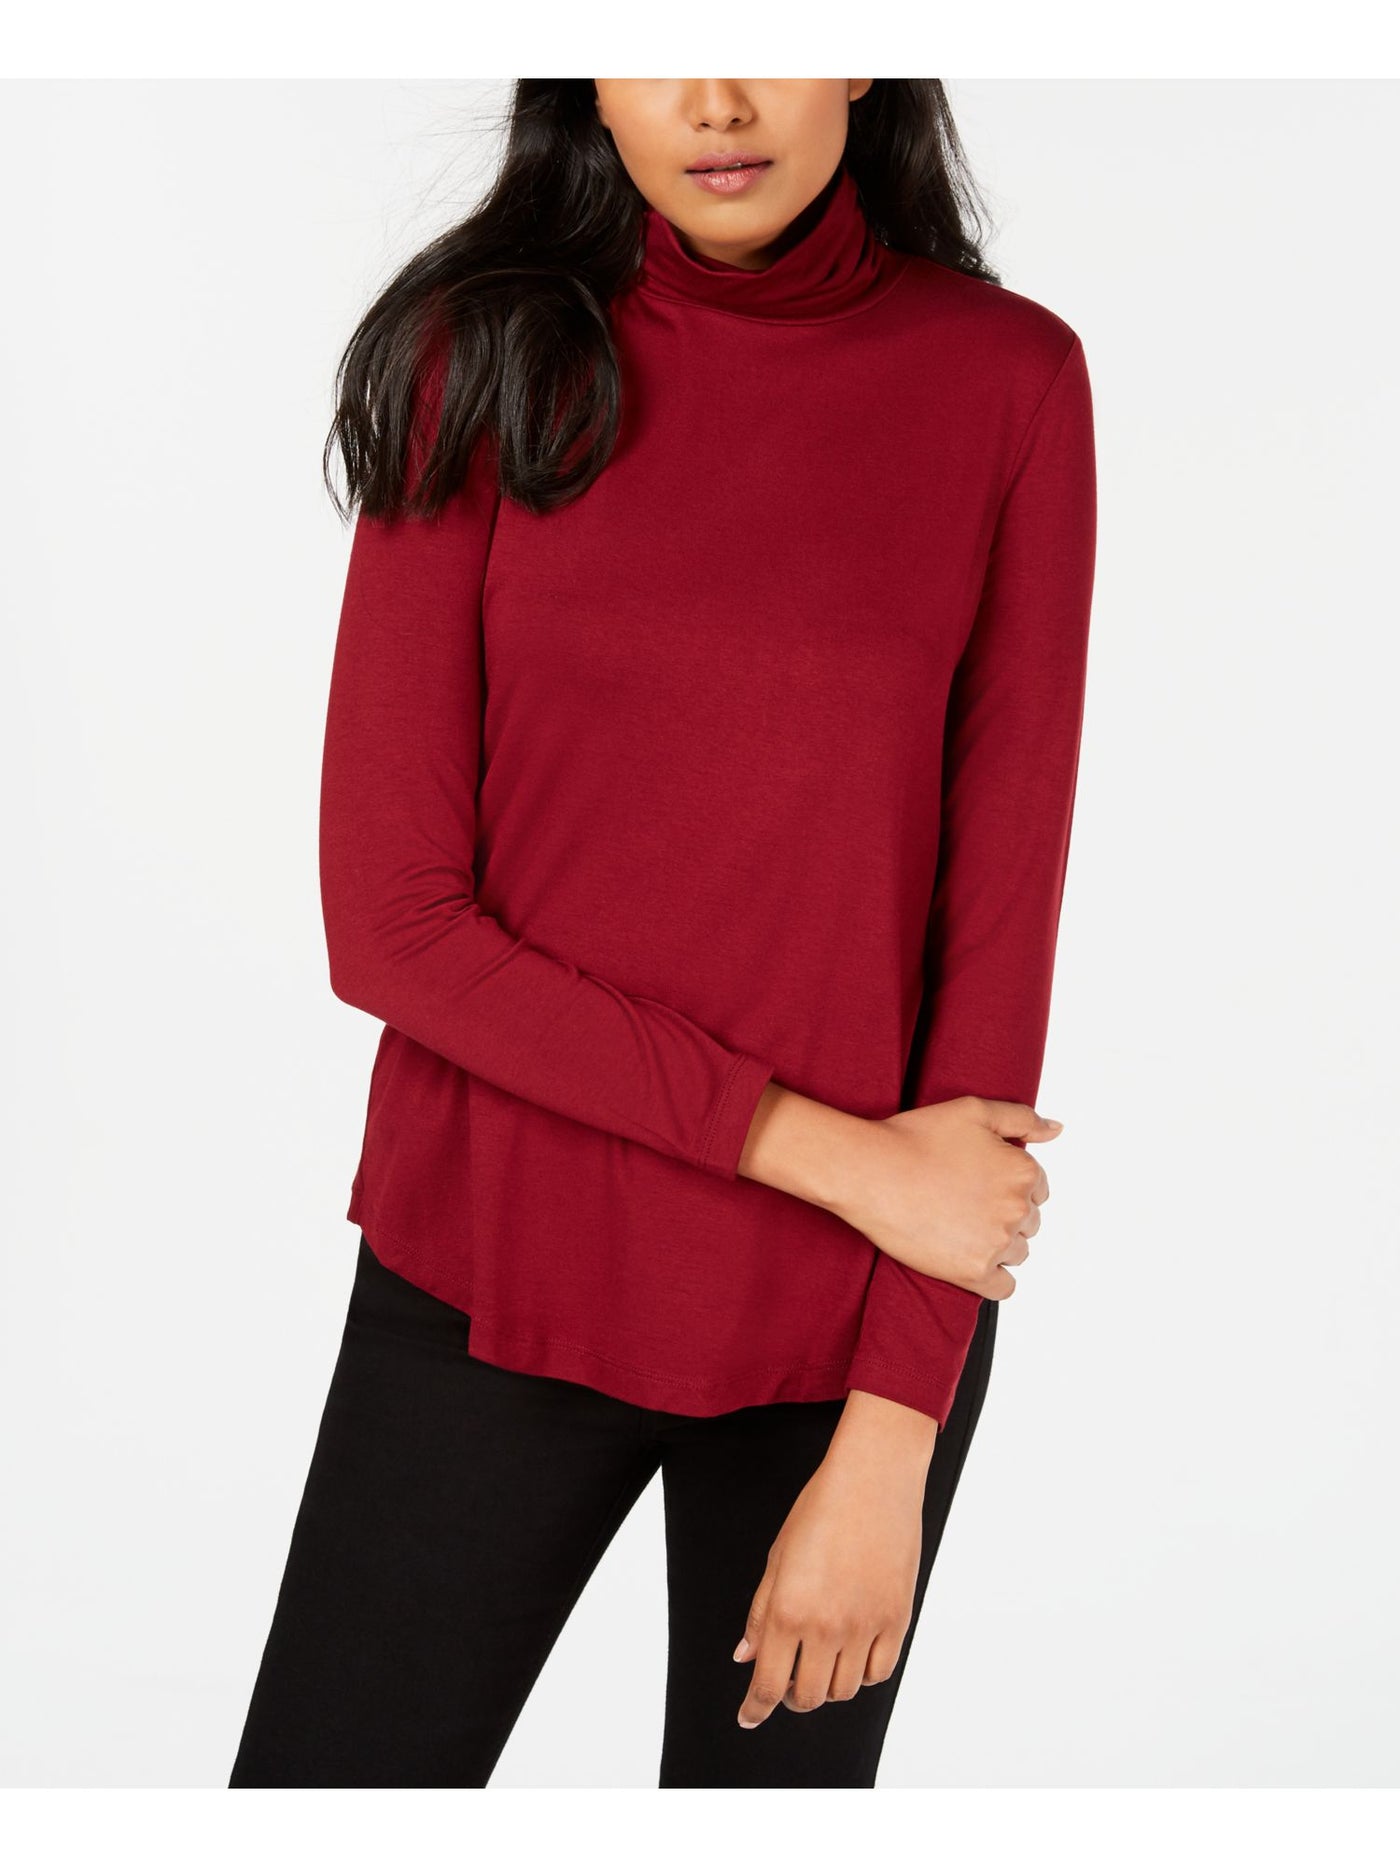 JM COLLECTION Womens Long Sleeve Turtle Neck Top